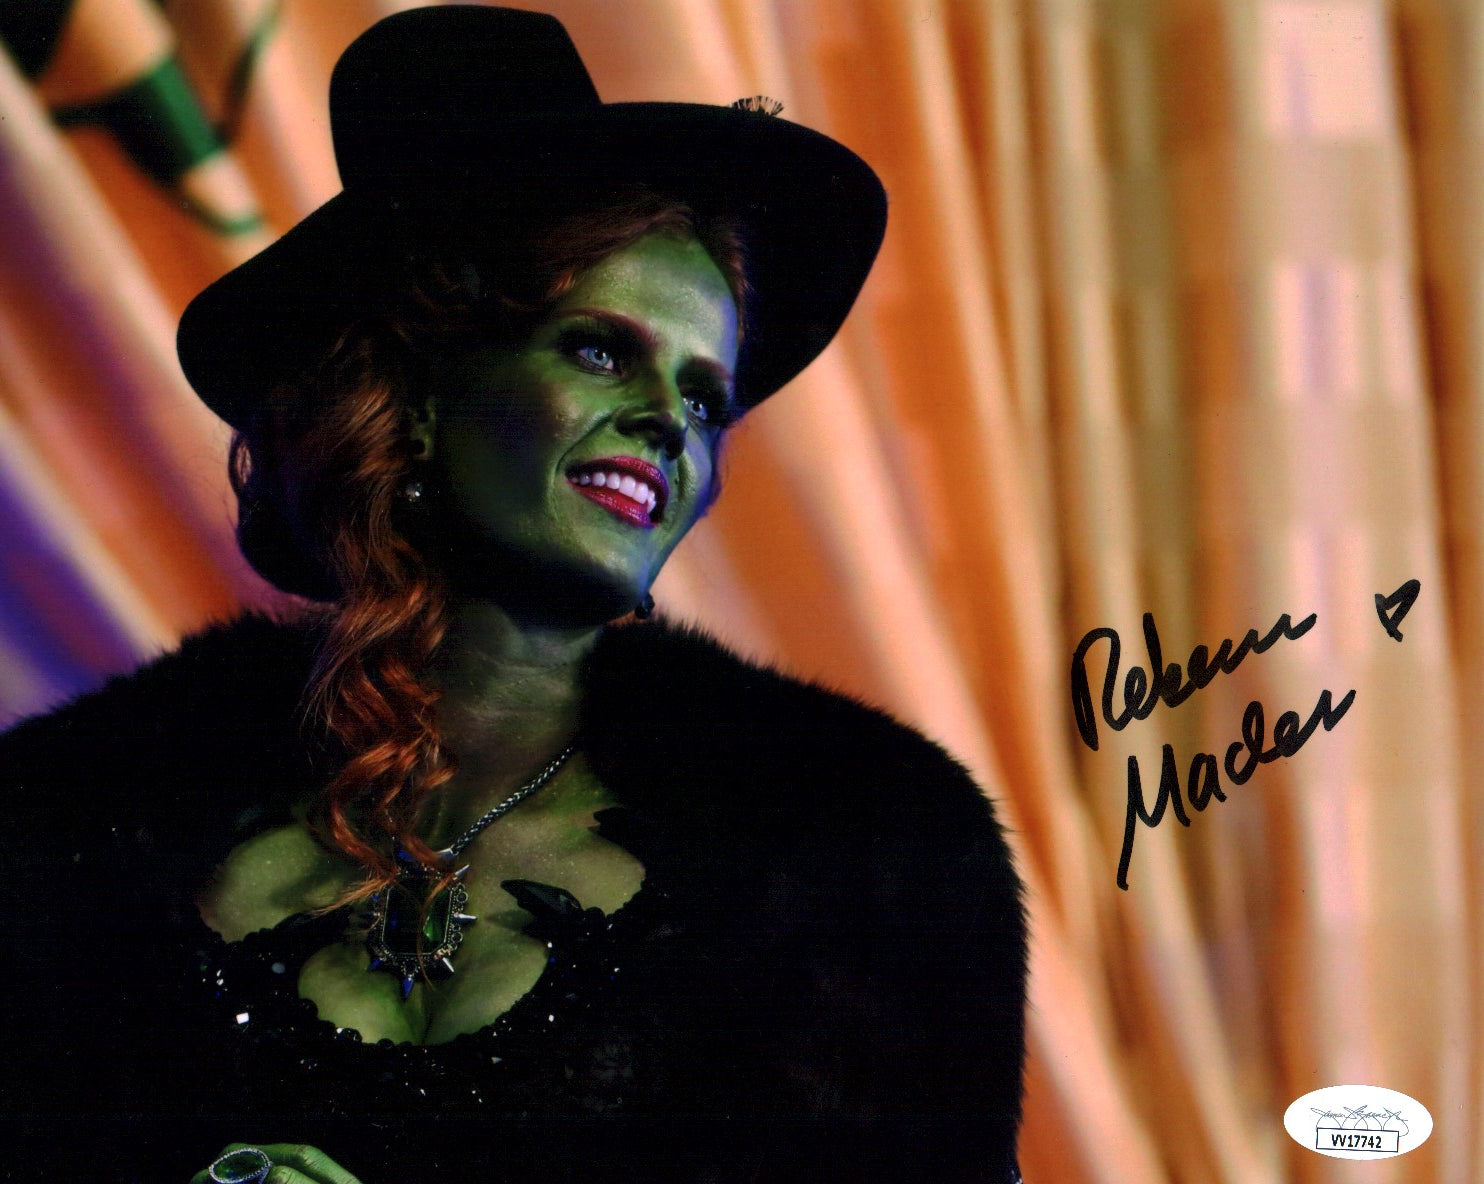 Rebecca Mader Once Upon A Time OUAT 8x10 Signed Photo JSA COA Certified Autograph